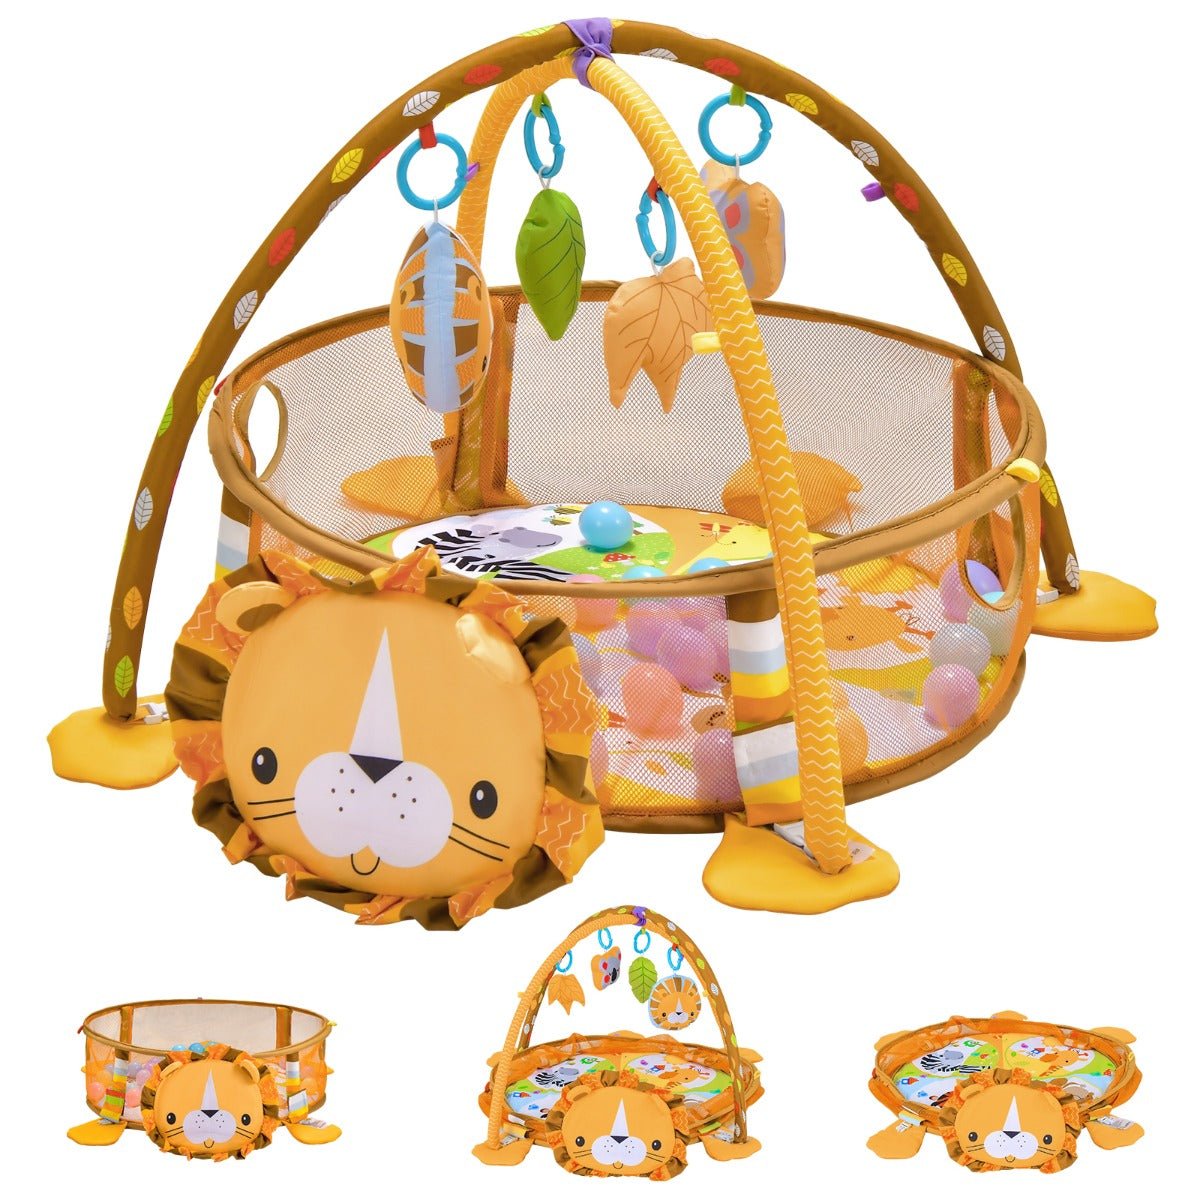 Shop 4-in-1 Baby Play Gym with Soft Padding Mat & Arch Design